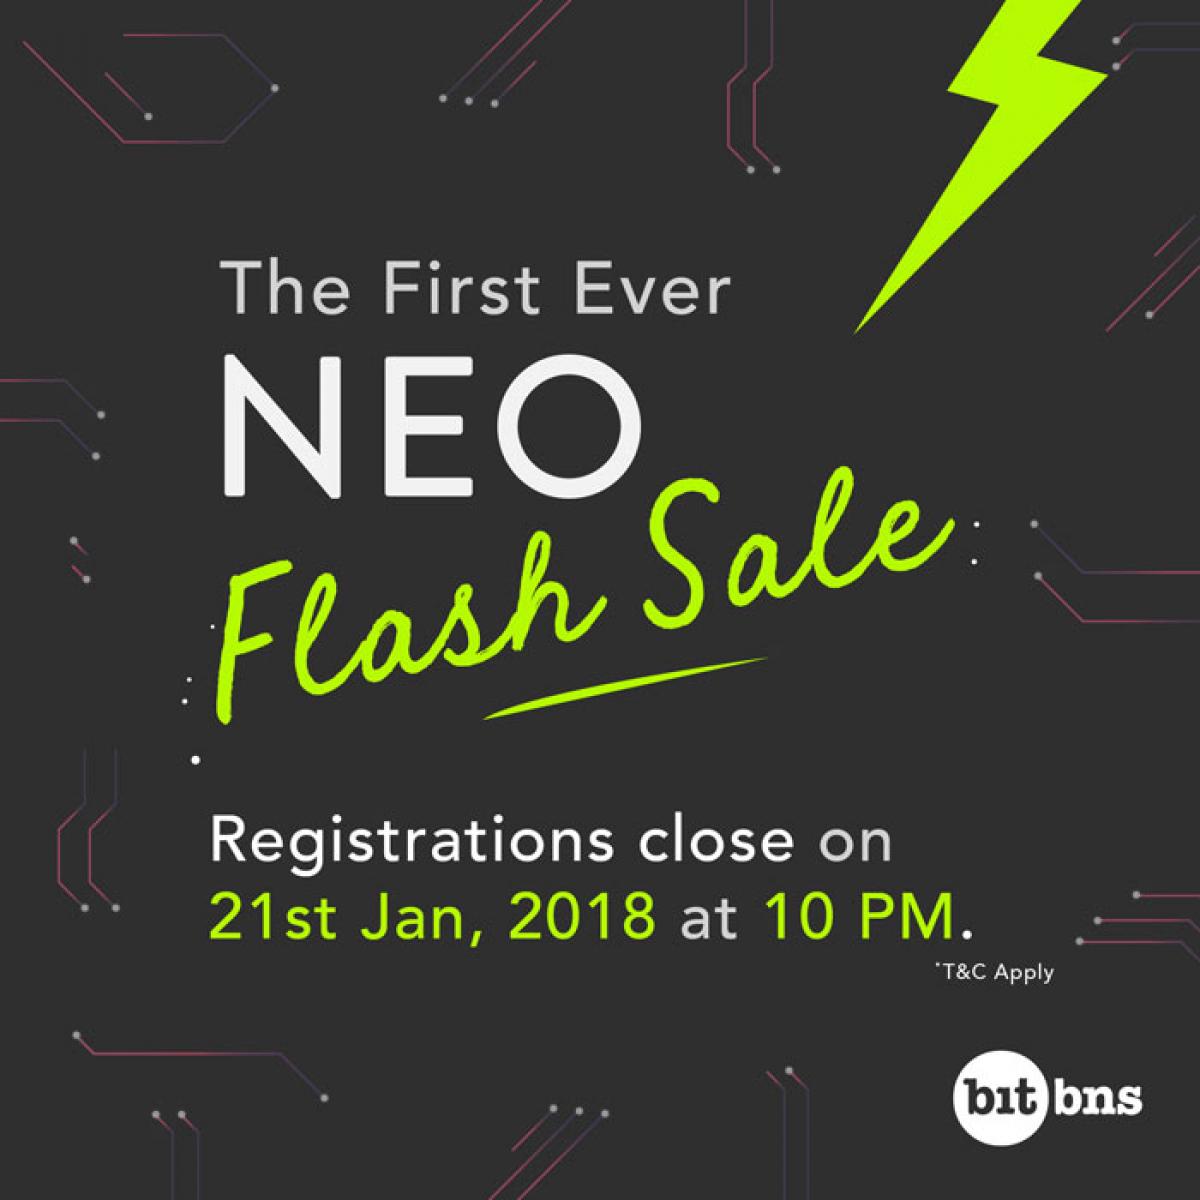 Buy NEO in India – The First NEO Flash Sale on Indian Platform